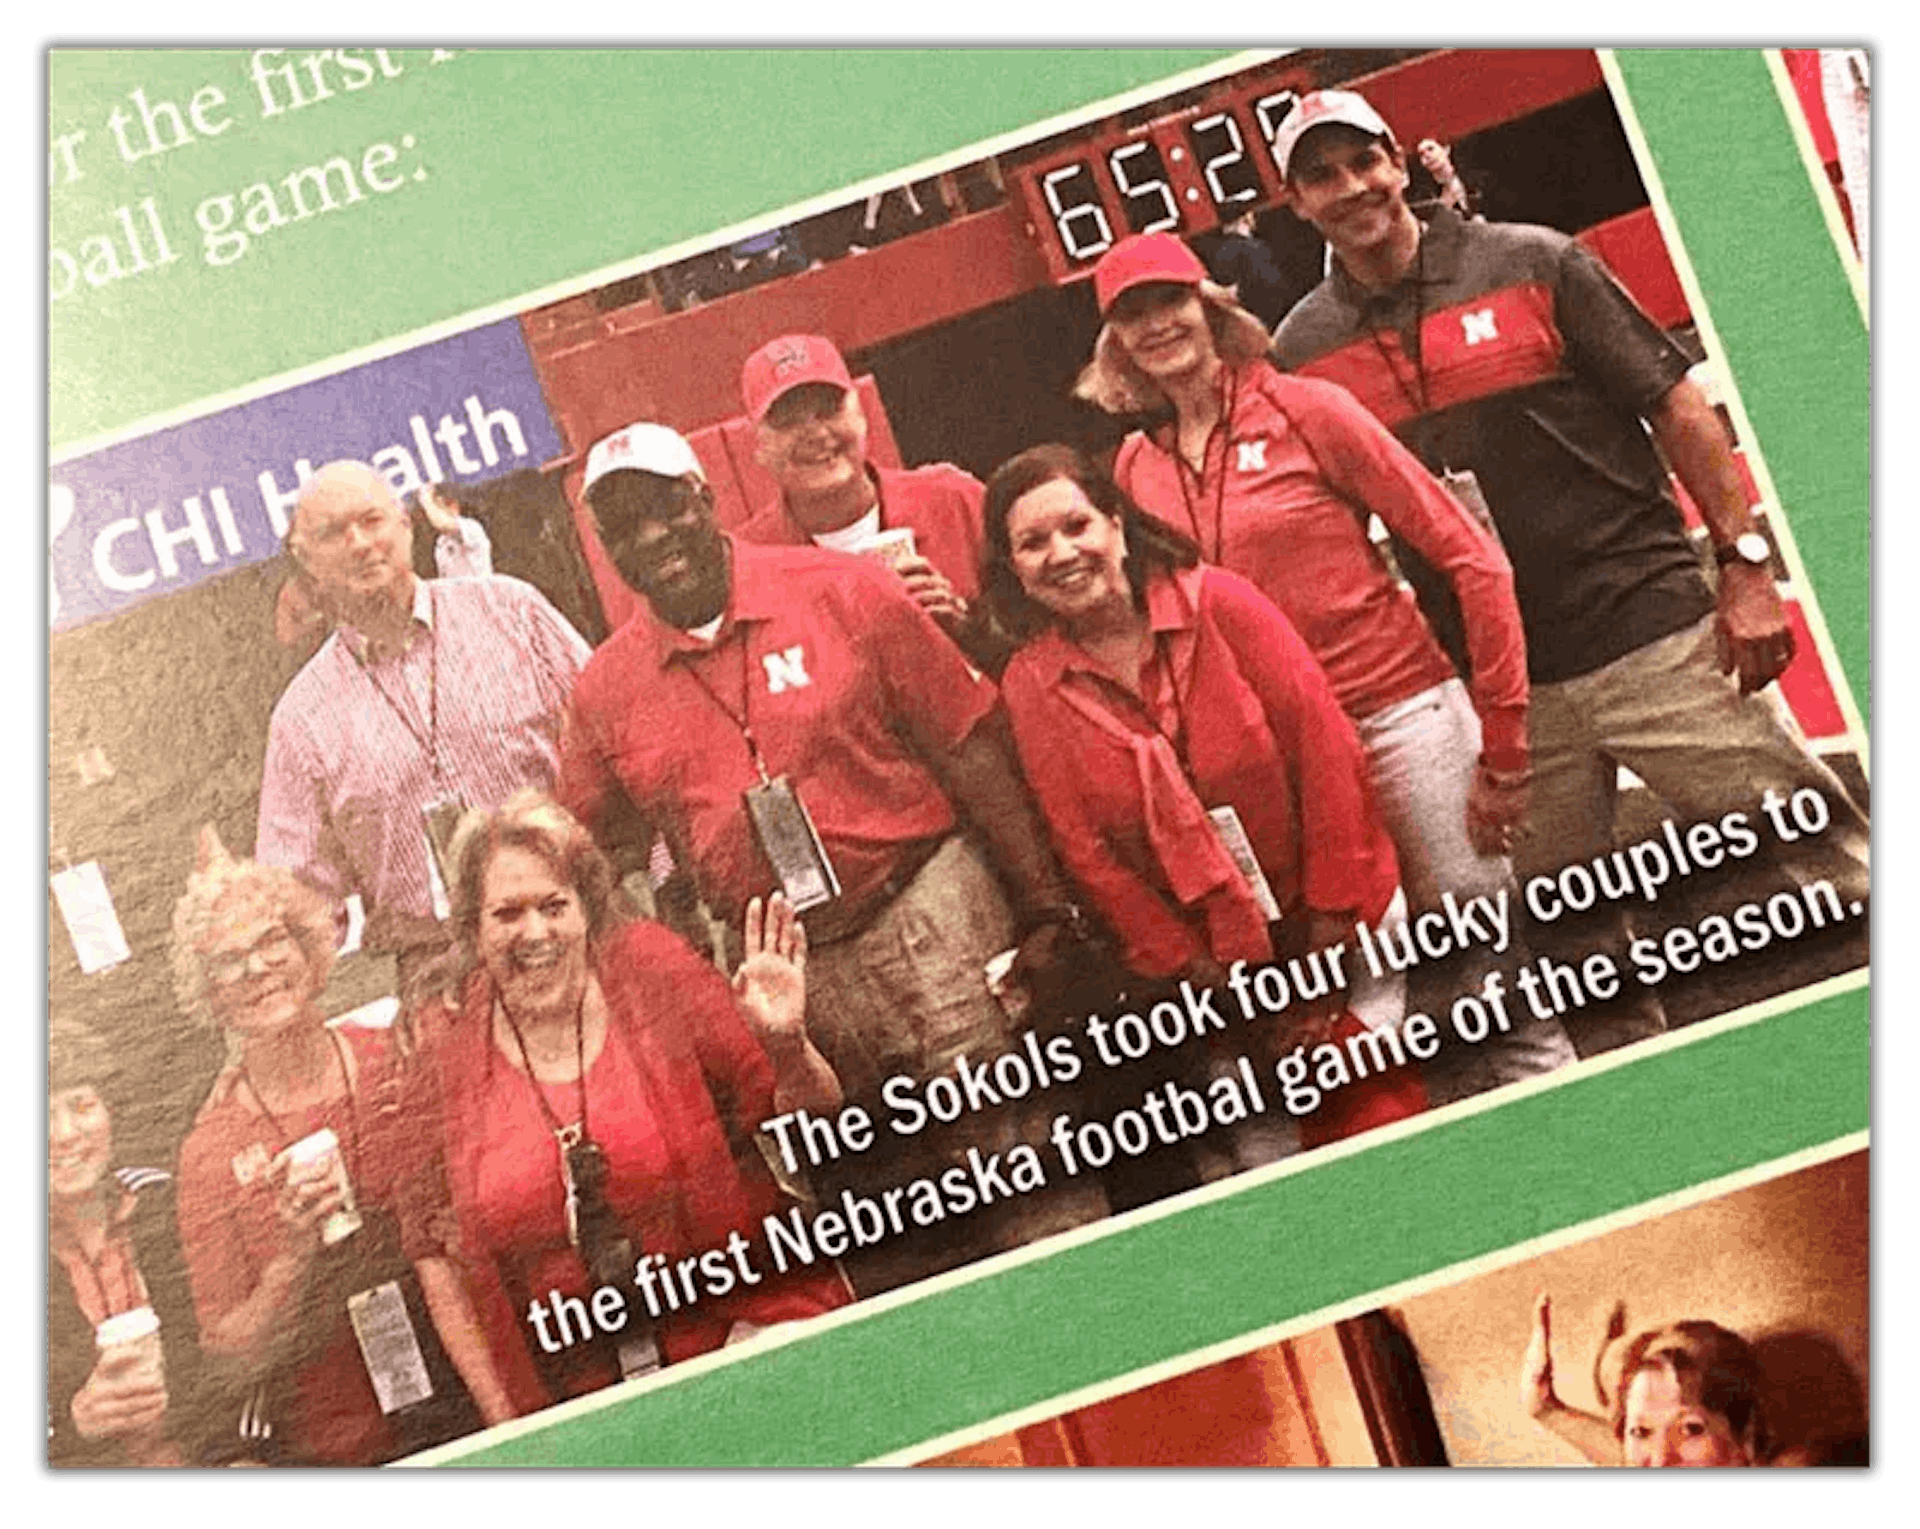 Sokol, back left, has arranged for Thomas and others to attend several sporting events at the University of Nebraska-Lincoln. The invitations come with all-access passes and seats in a luxury suite. The justice’s wife, Ginni, has memorialized some of these trips in cards to friends. Credit: Obtained by ProPublica